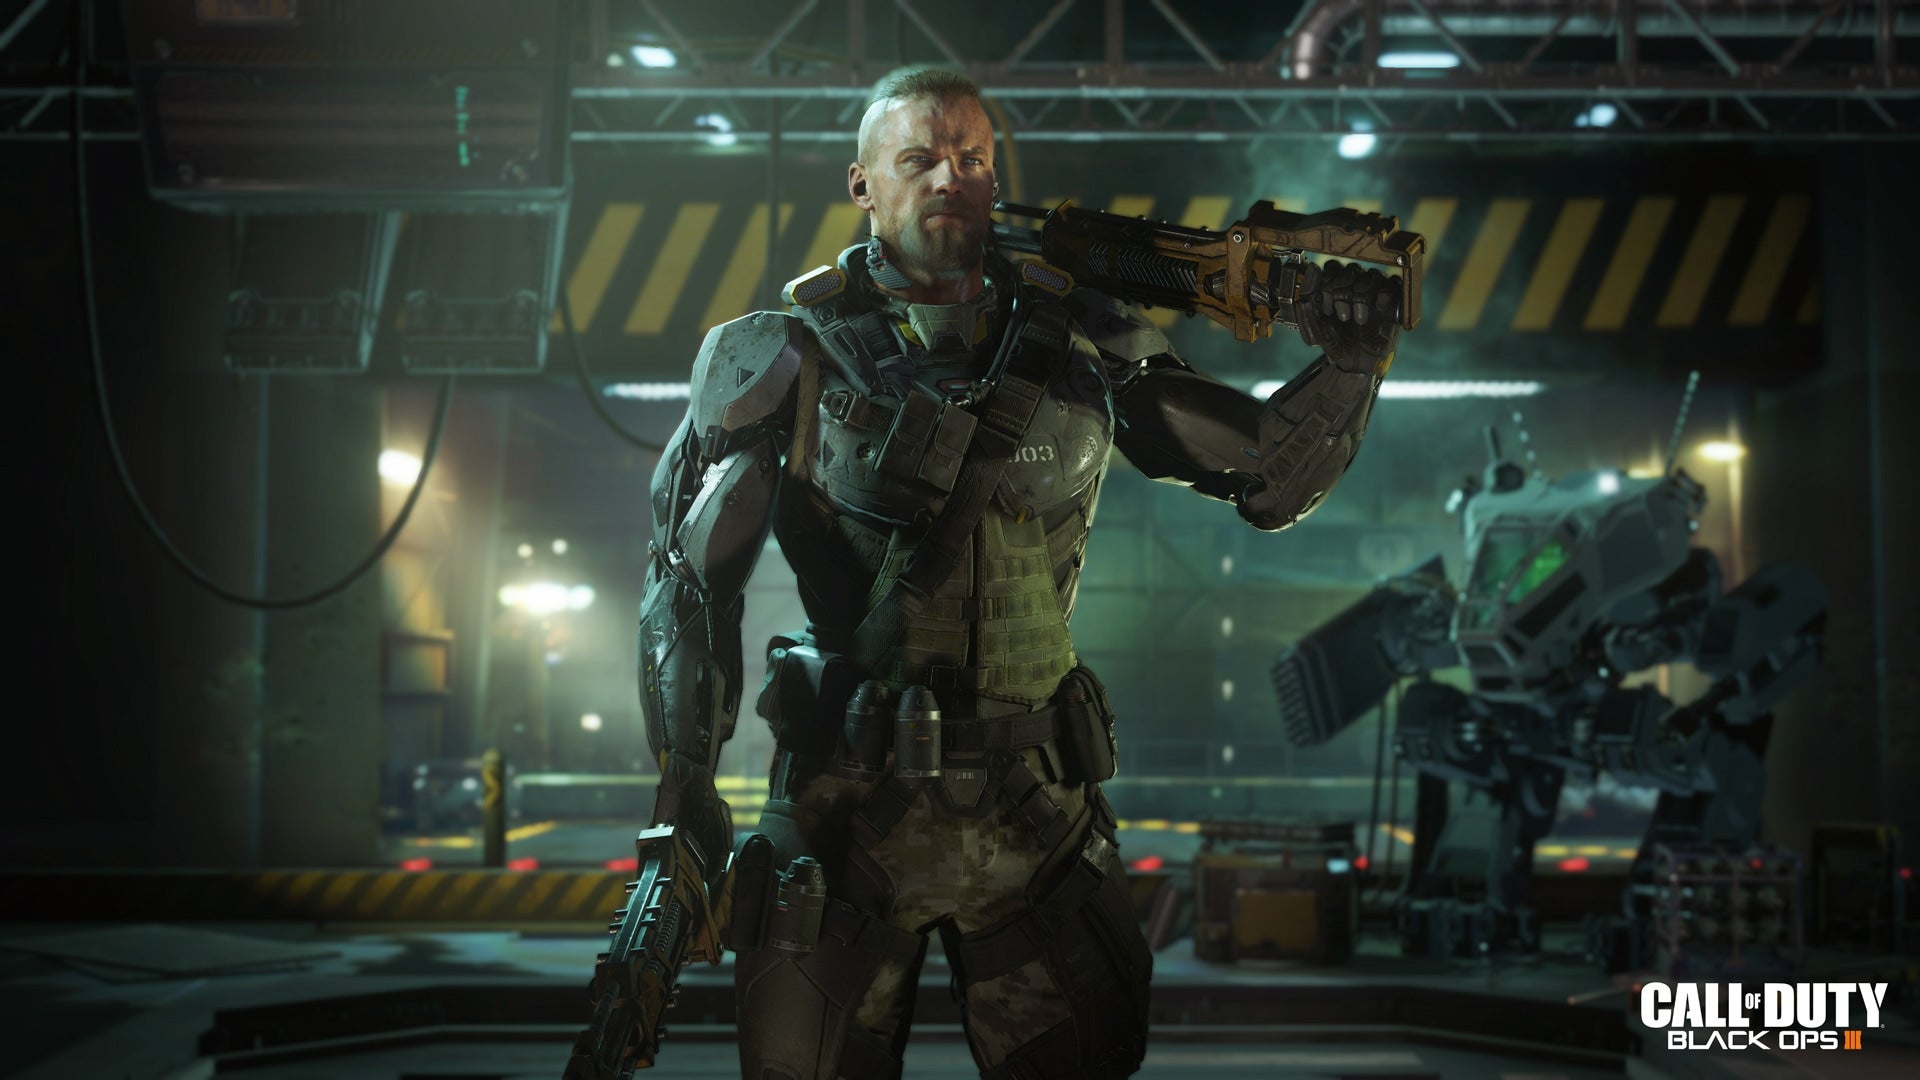 Image for Call of Duty Black Ops 3 PS4 Pro Analysis